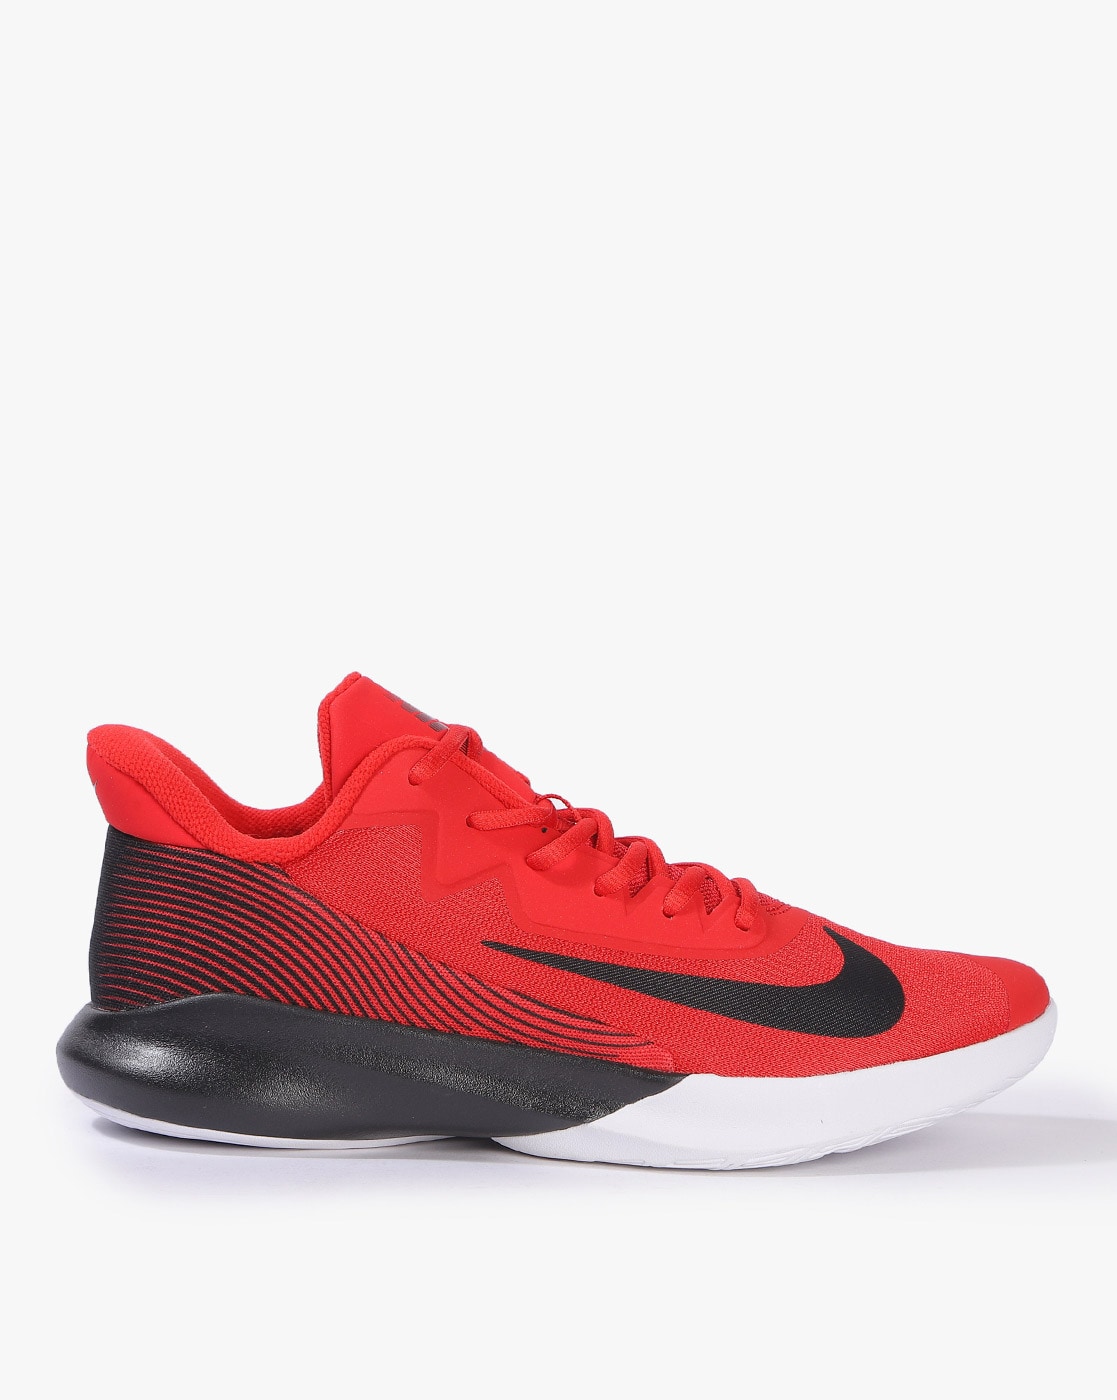 nike shoes sports red